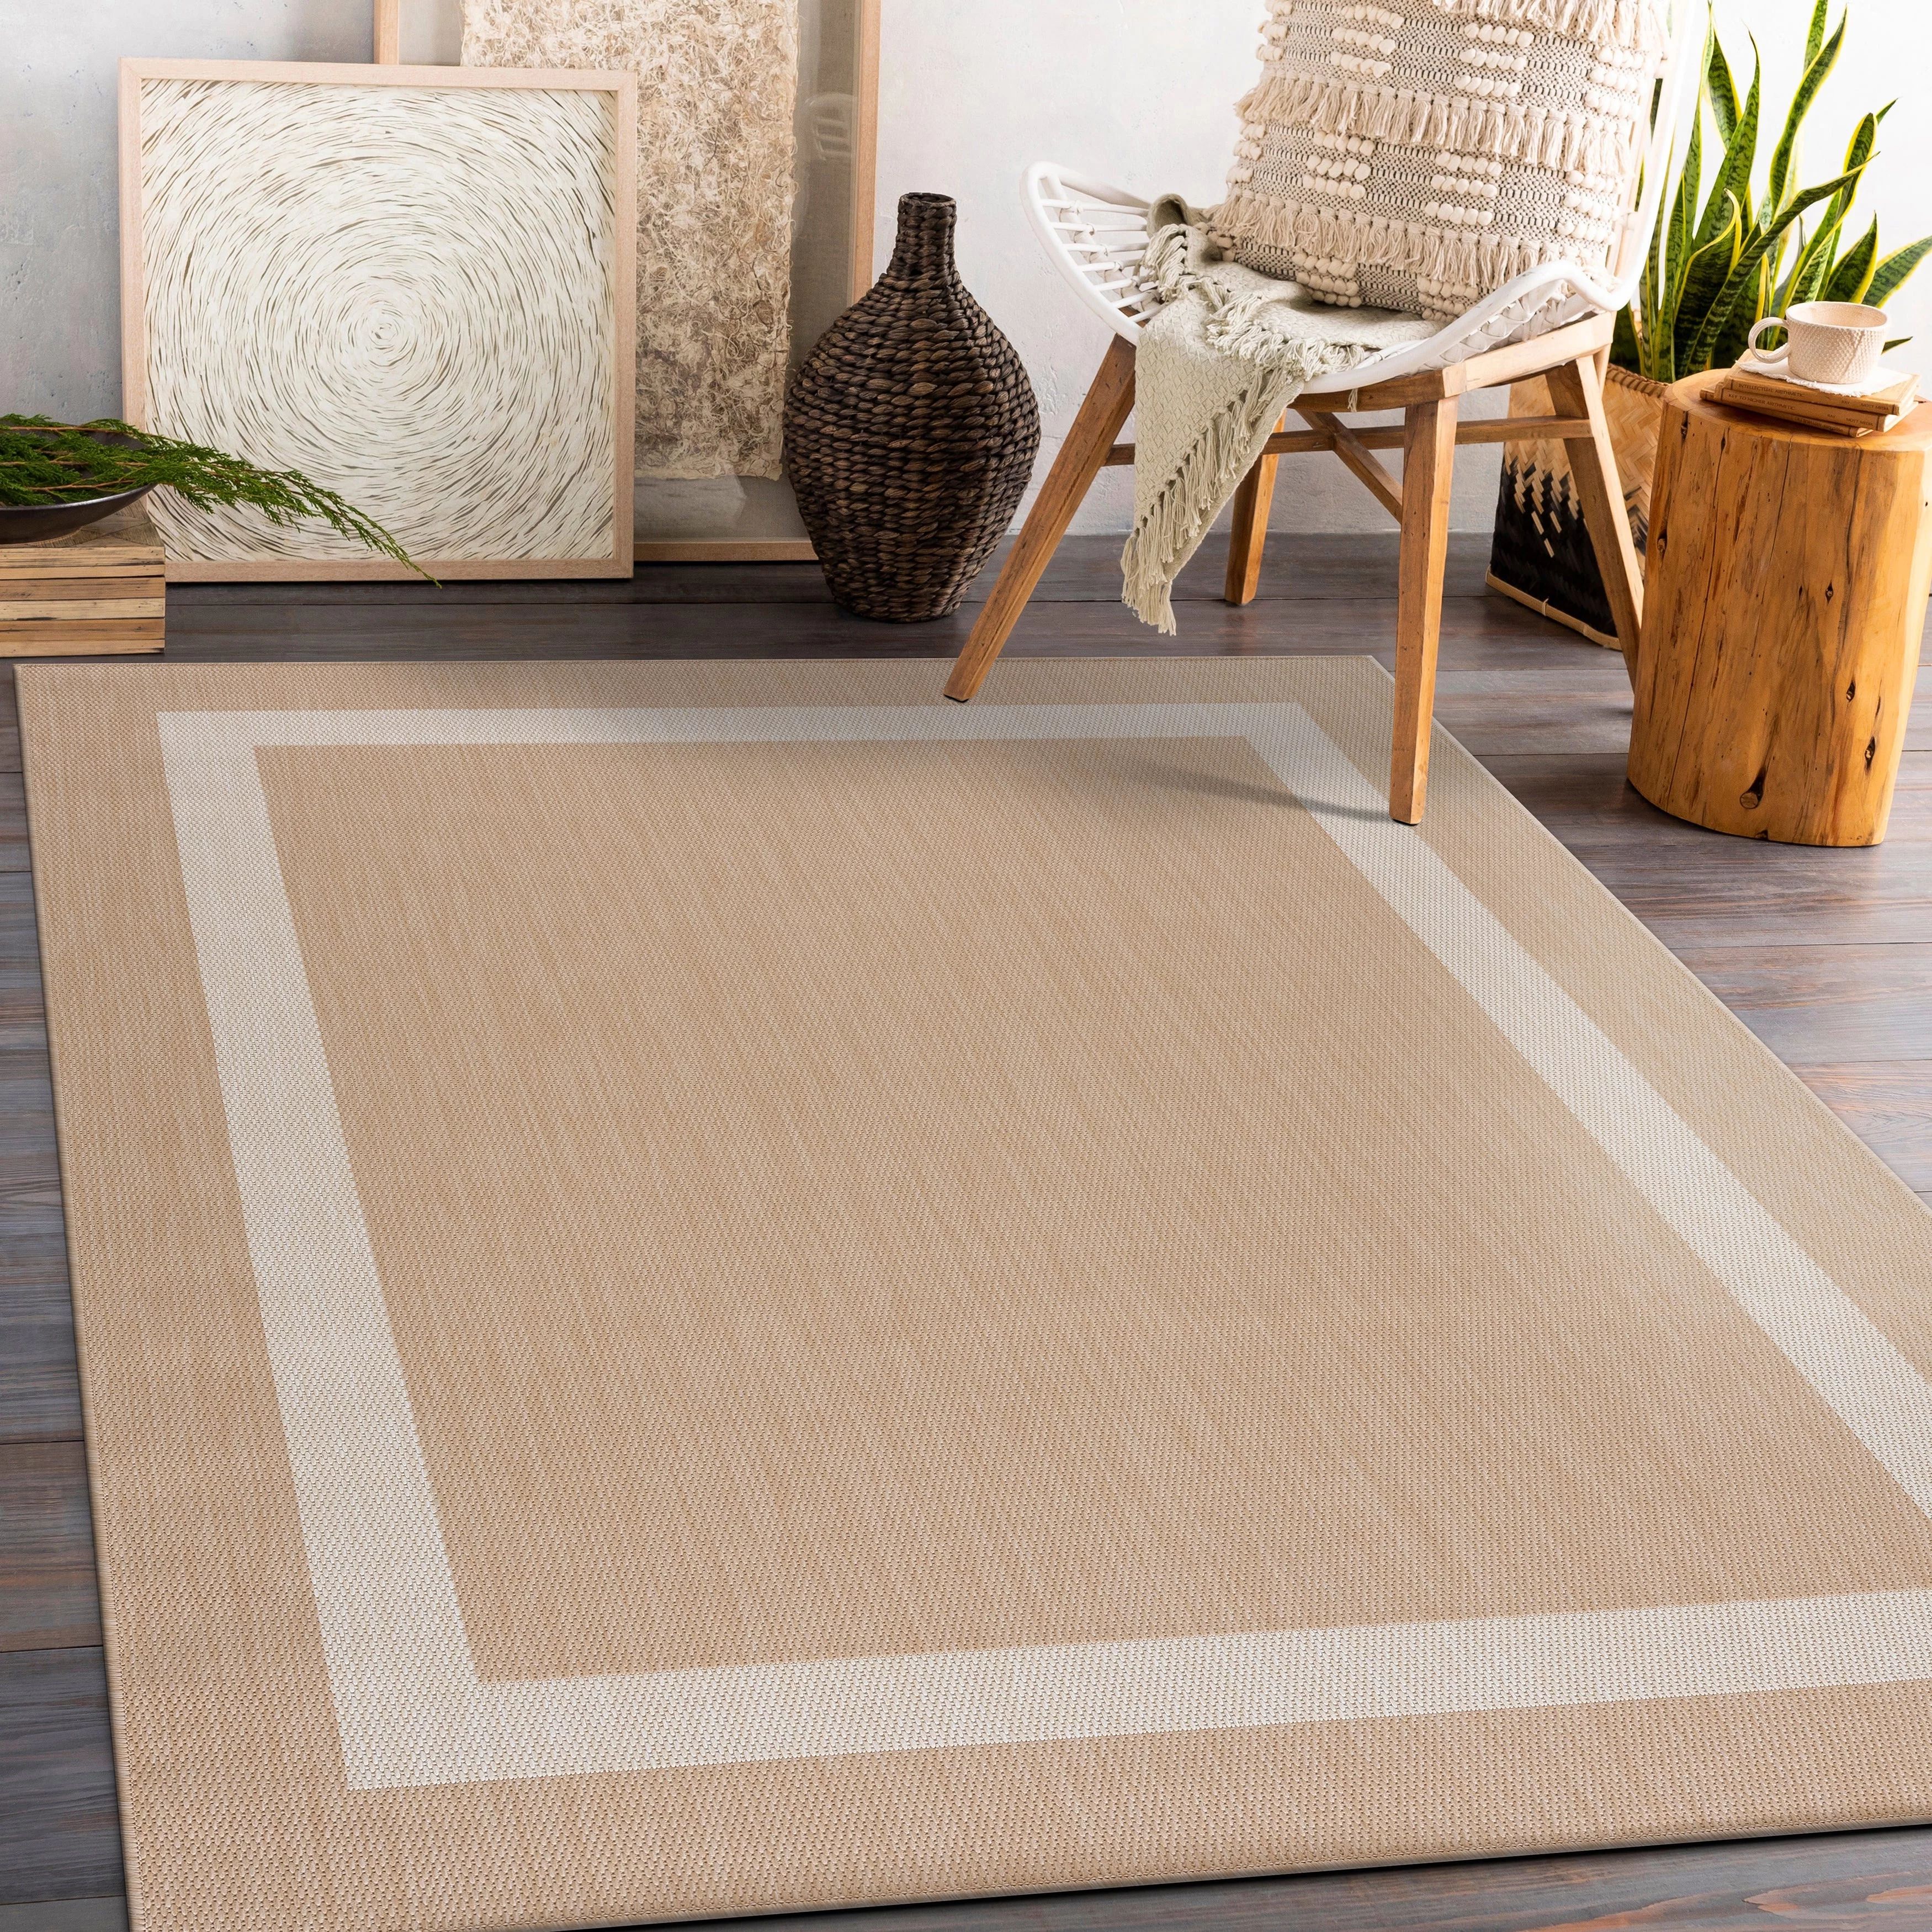 Camilson Outdoor Rug - 5'3x7'0" Rugs for Indoor Outdoor Patios, Bordered Beige/White Washable Out... | Walmart (US)